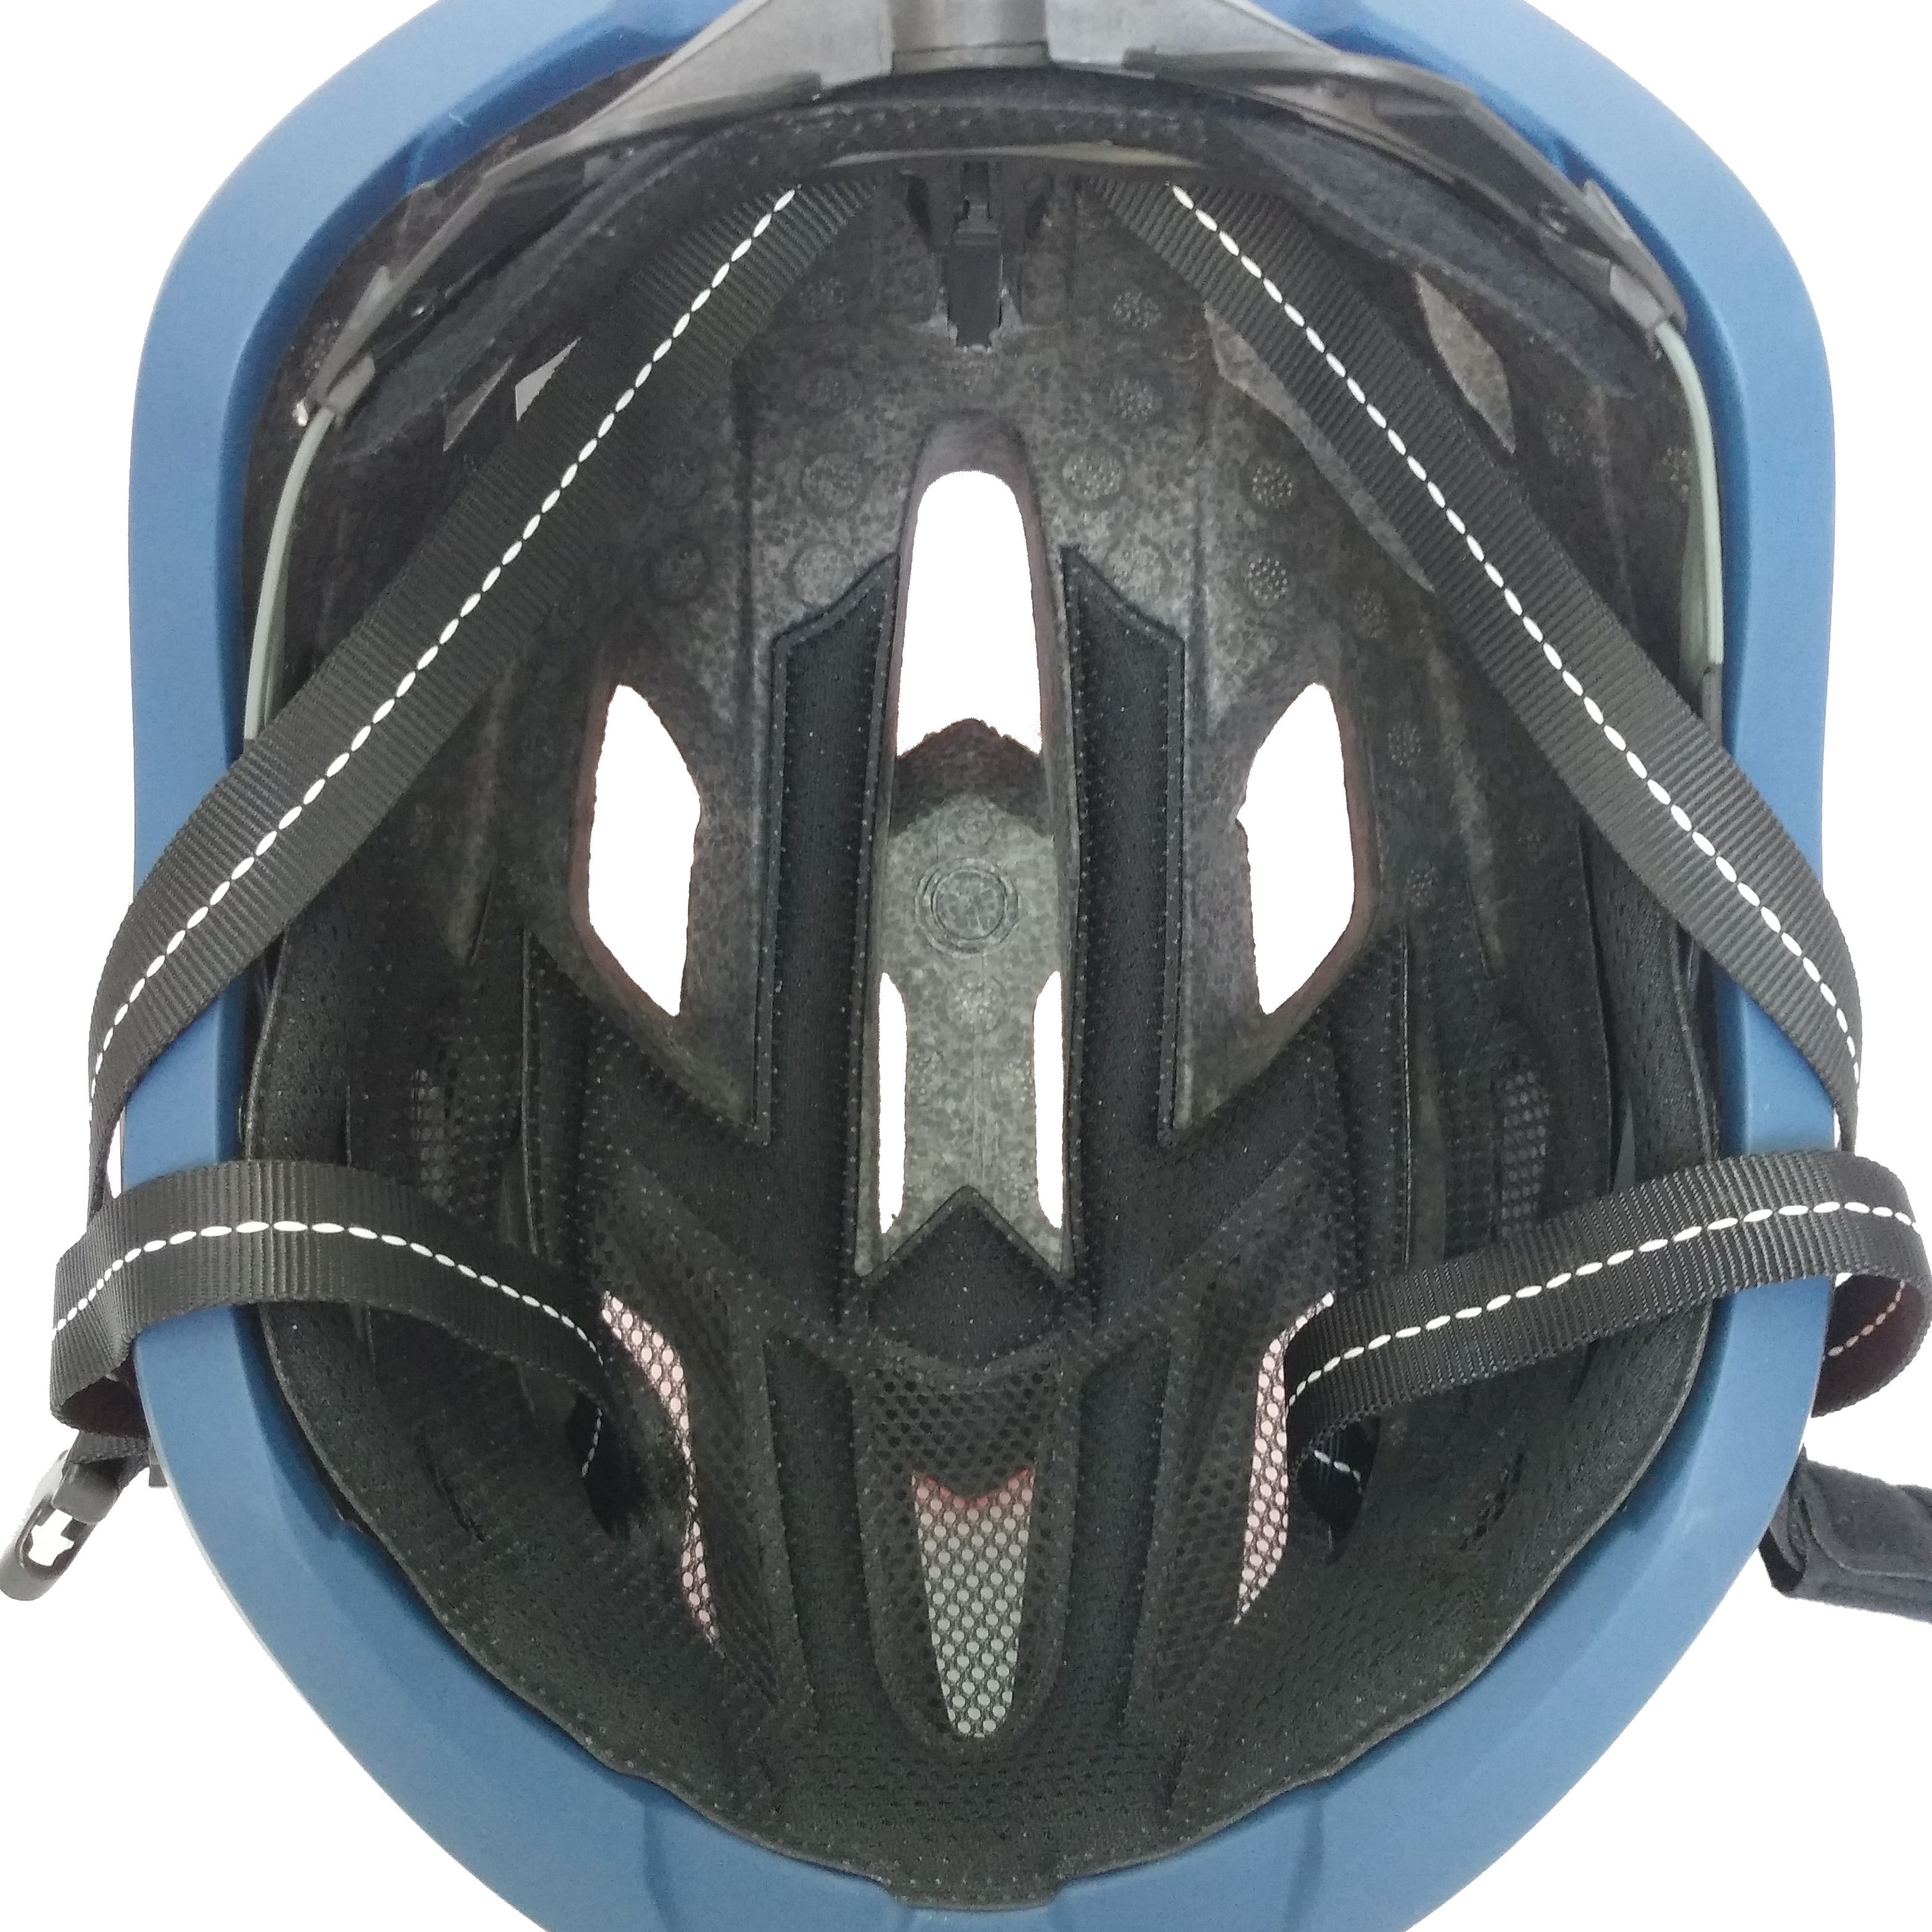 B3-18L Bicycle Helmet with rear LED warning light